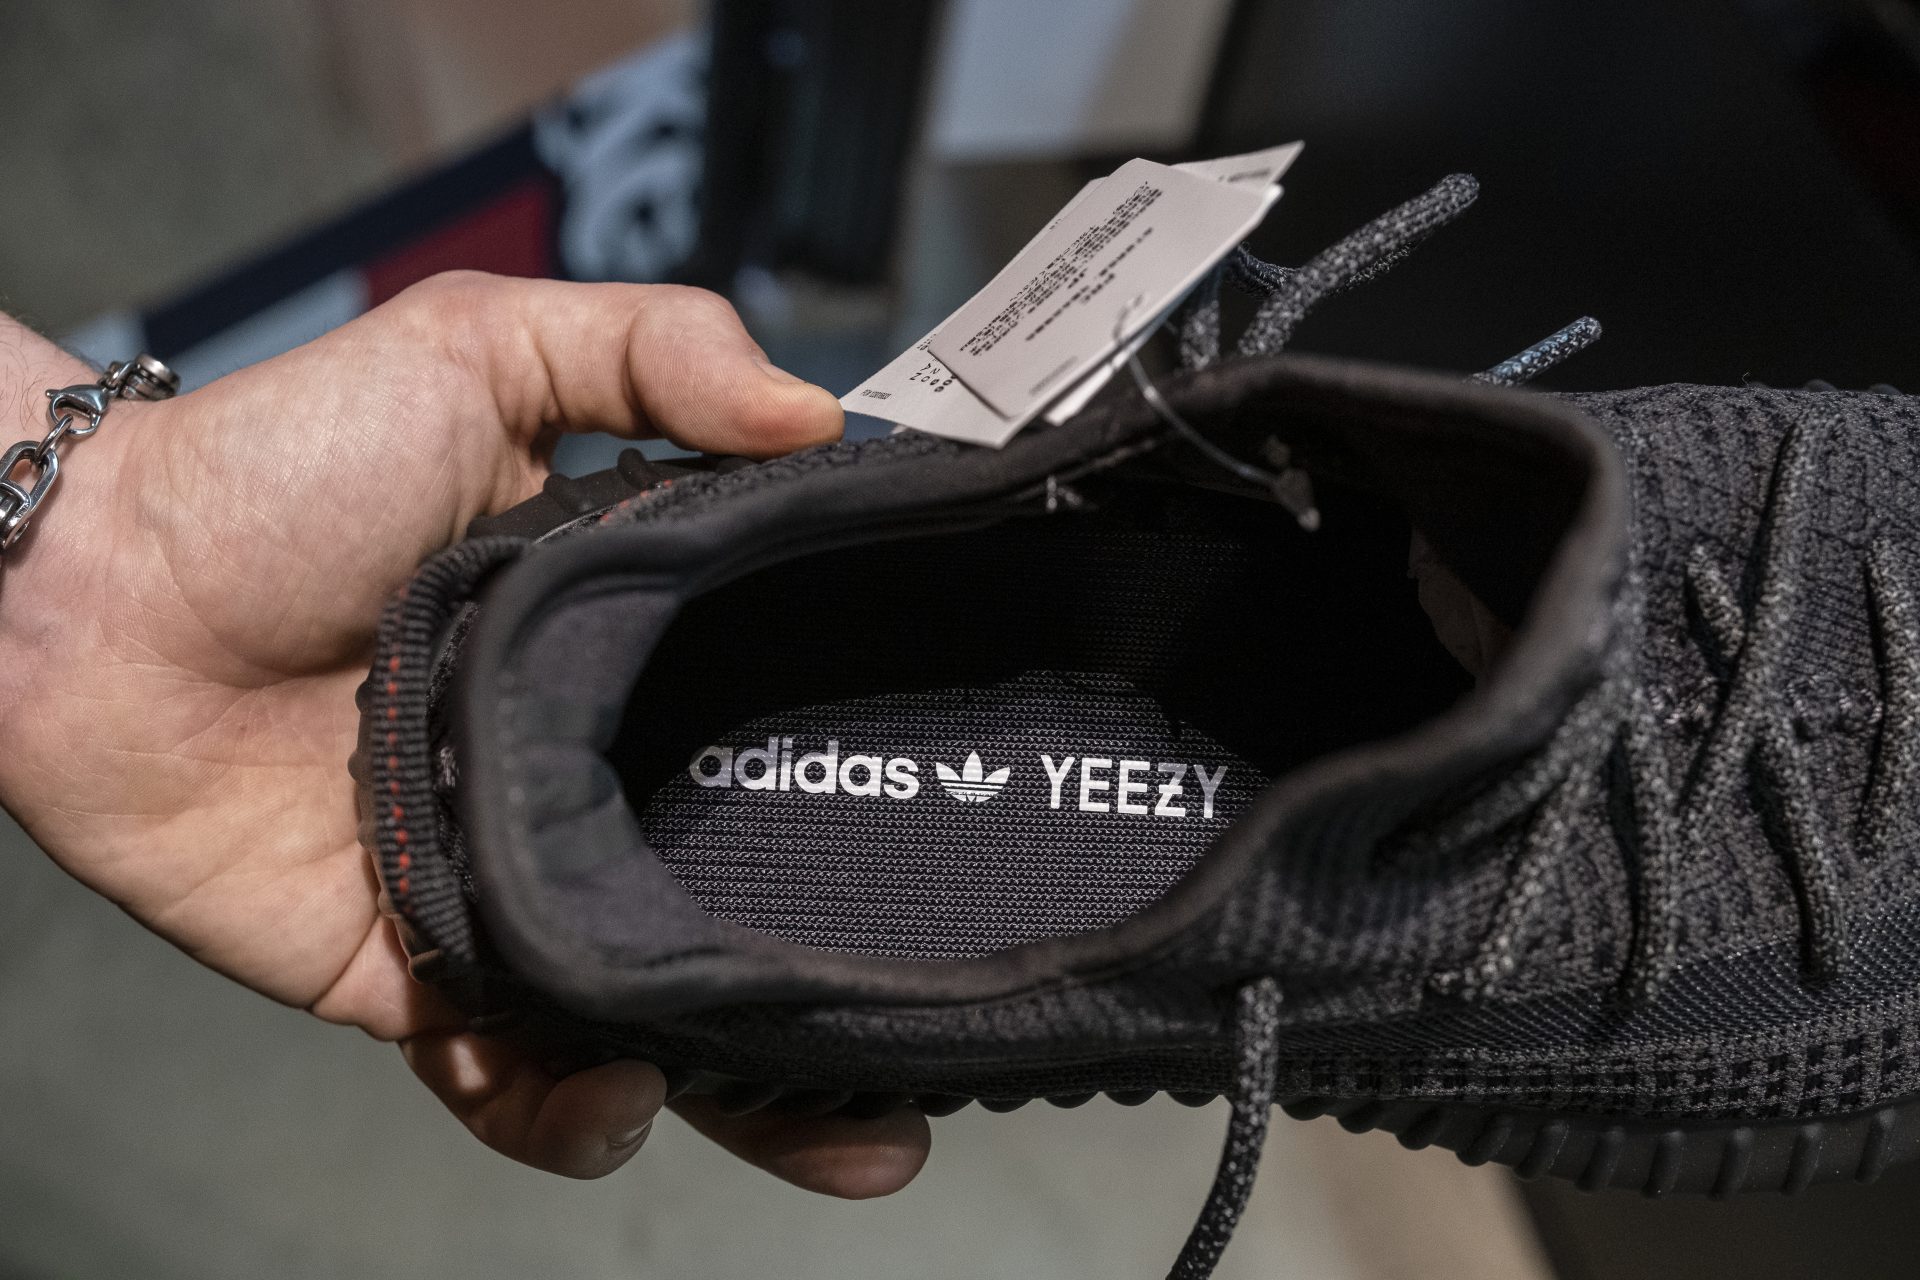 Adidas Resumes Promoting Remaining Yeezy Stock, Proceeds To Be Donated To Anti-Hate Organizations